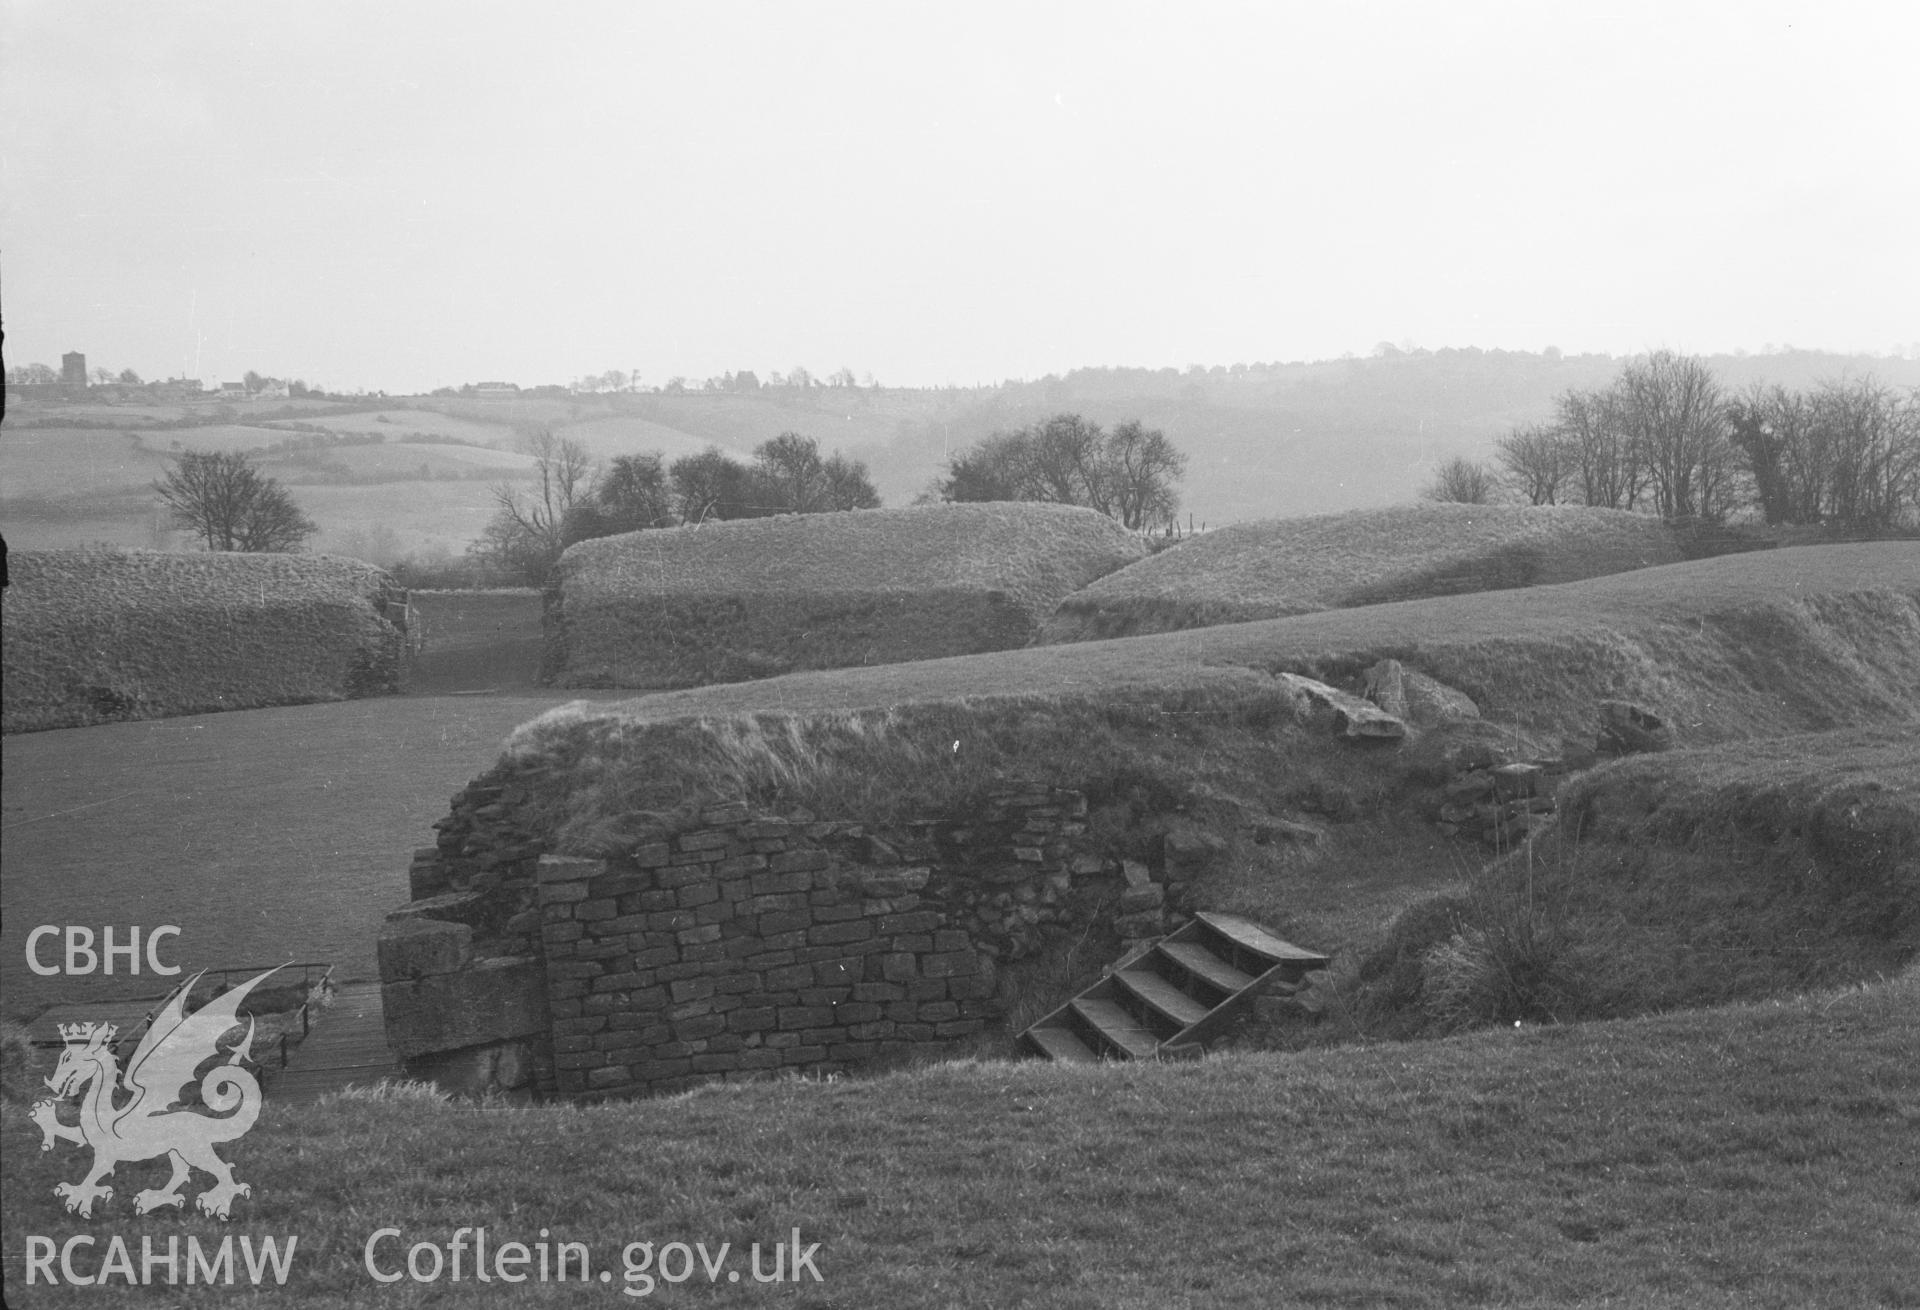 Digital copy of a nitrate negative showing a view of Caerleon legionary fortress taken by Ordnance Survey.